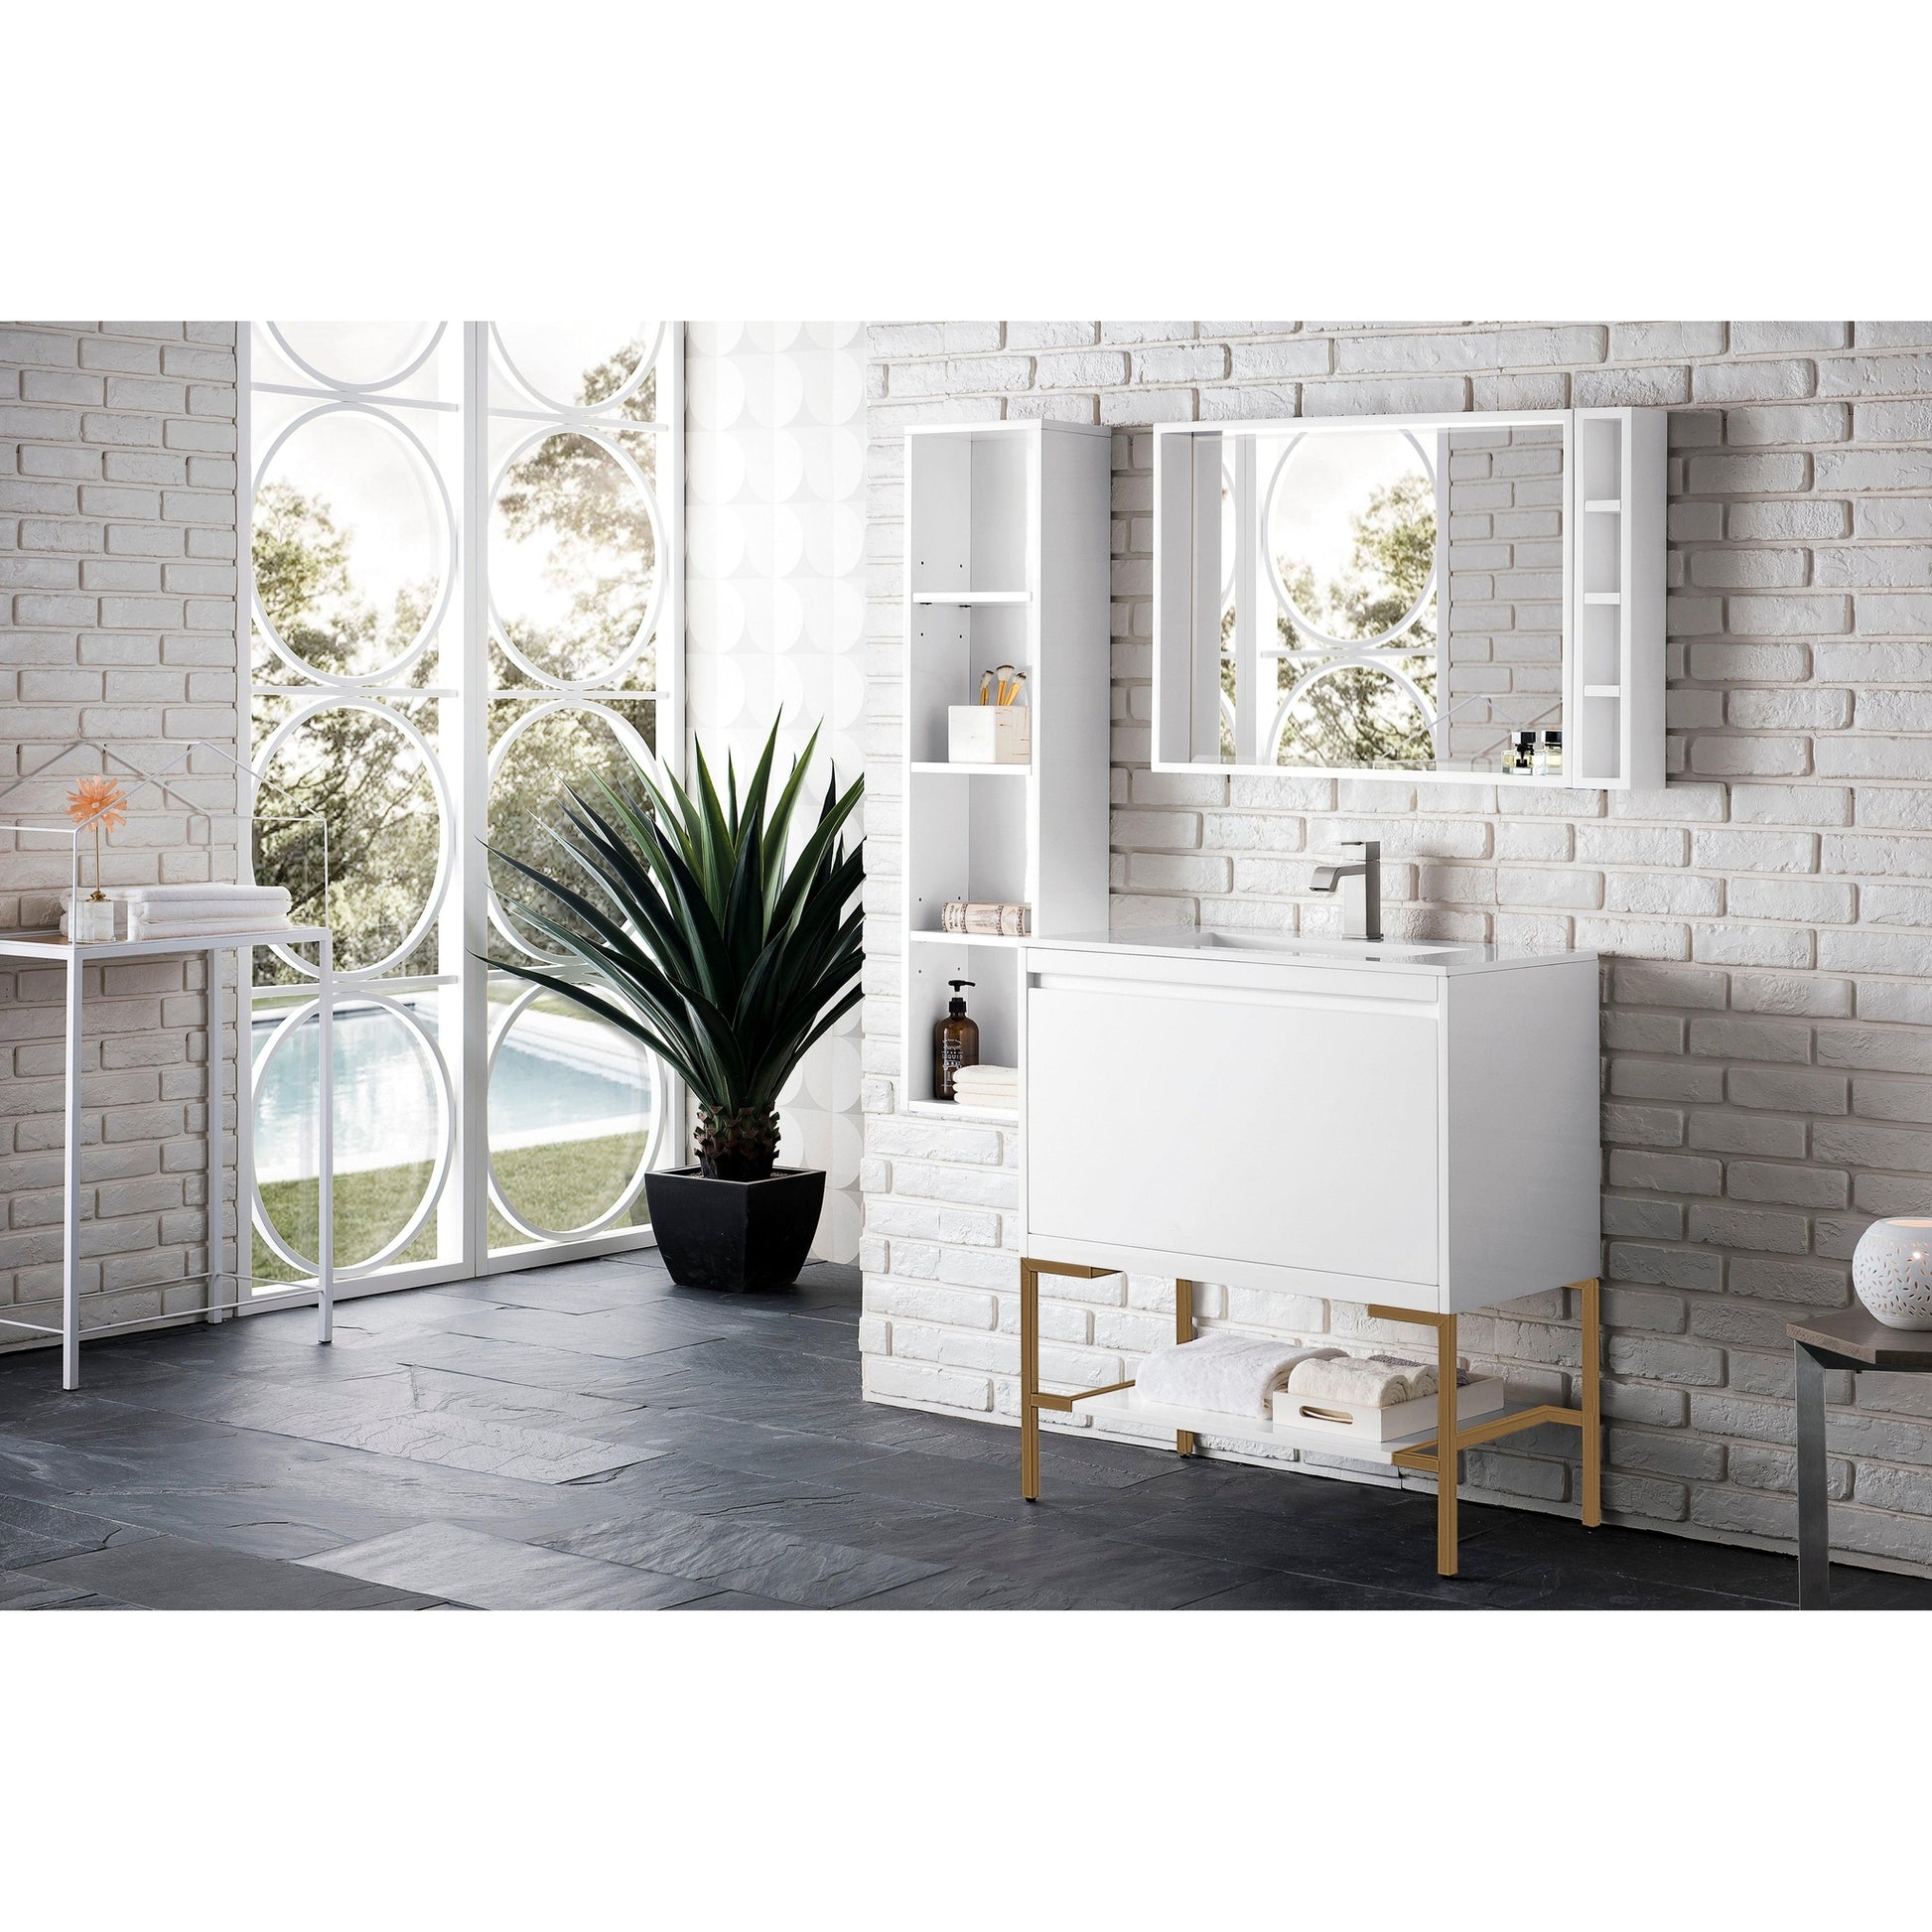 James Martin Vanities Milan 31.5" Glossy White, Radiant Gold Single Vanity Cabinet With Glossy White Composite Top